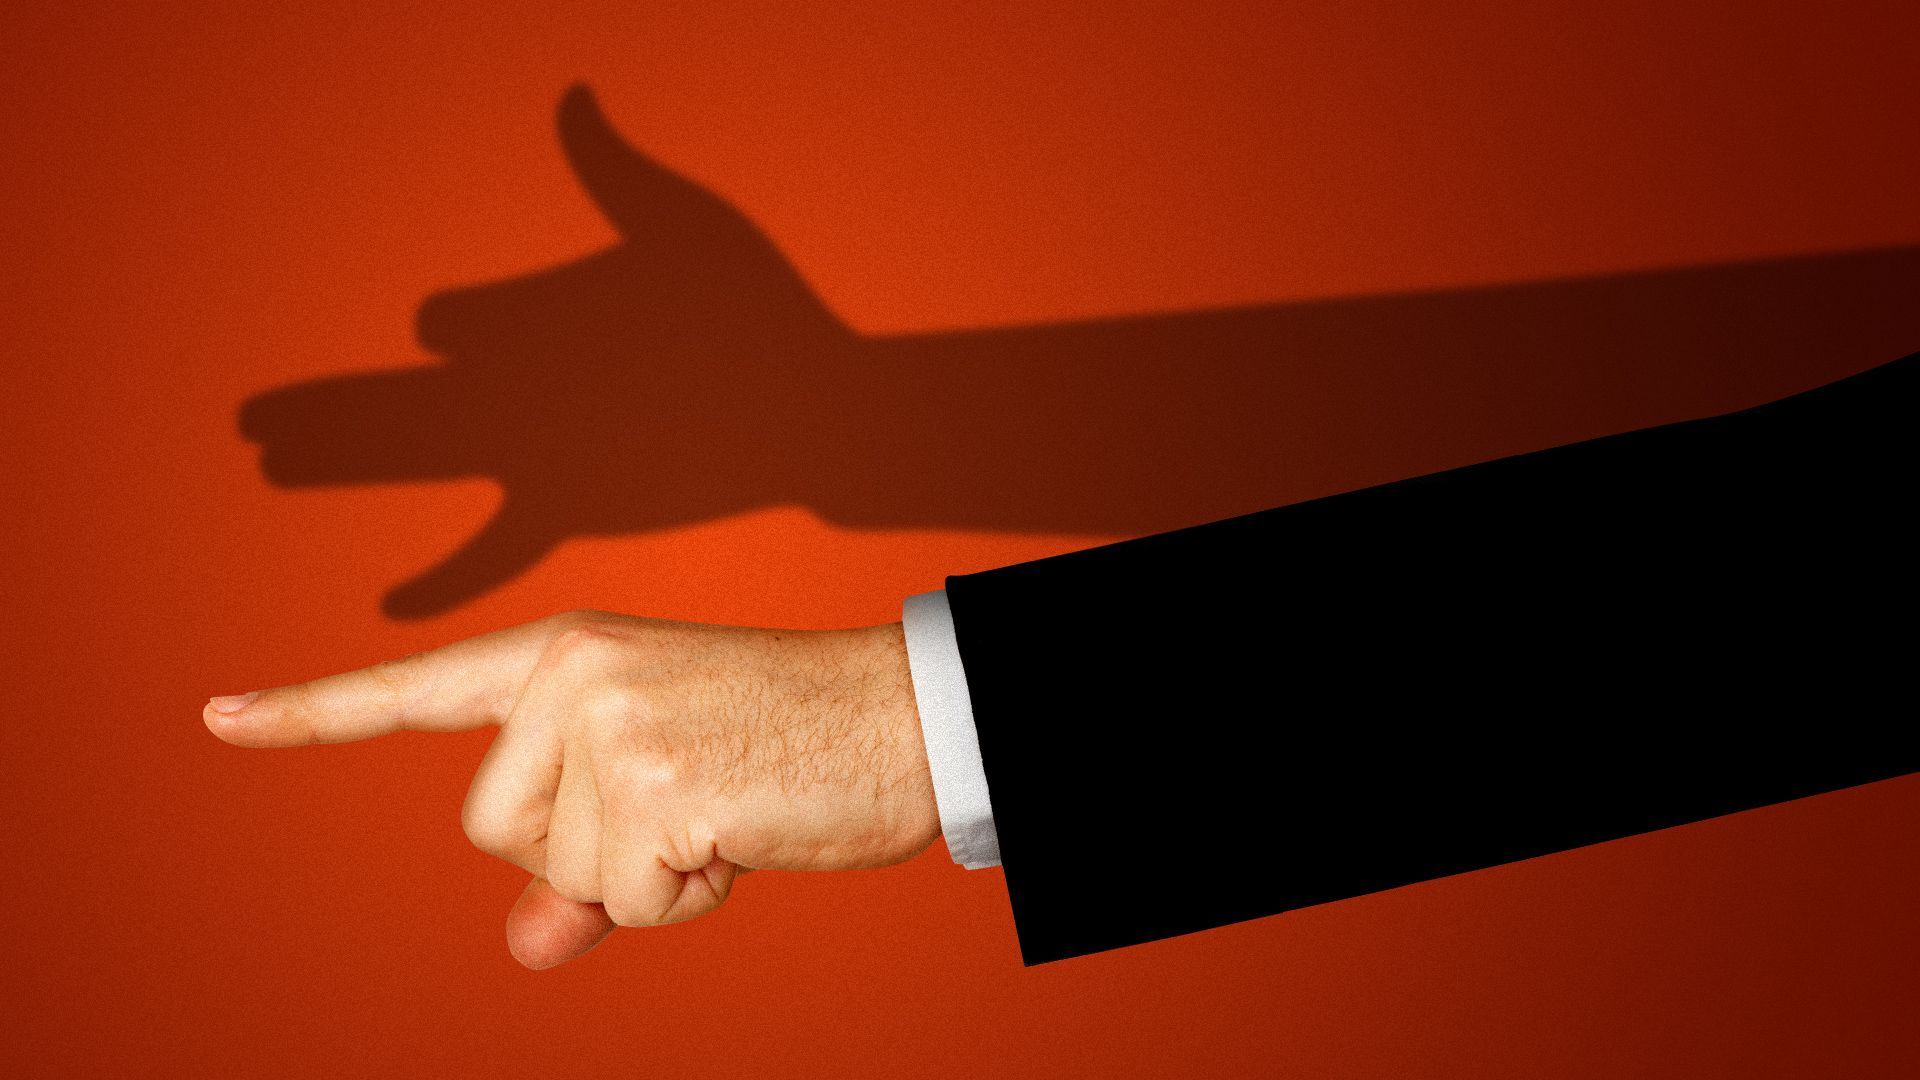 Illustration of a hand pointing accusingly, with the shadow of the hand in the shape of a barking dog. 